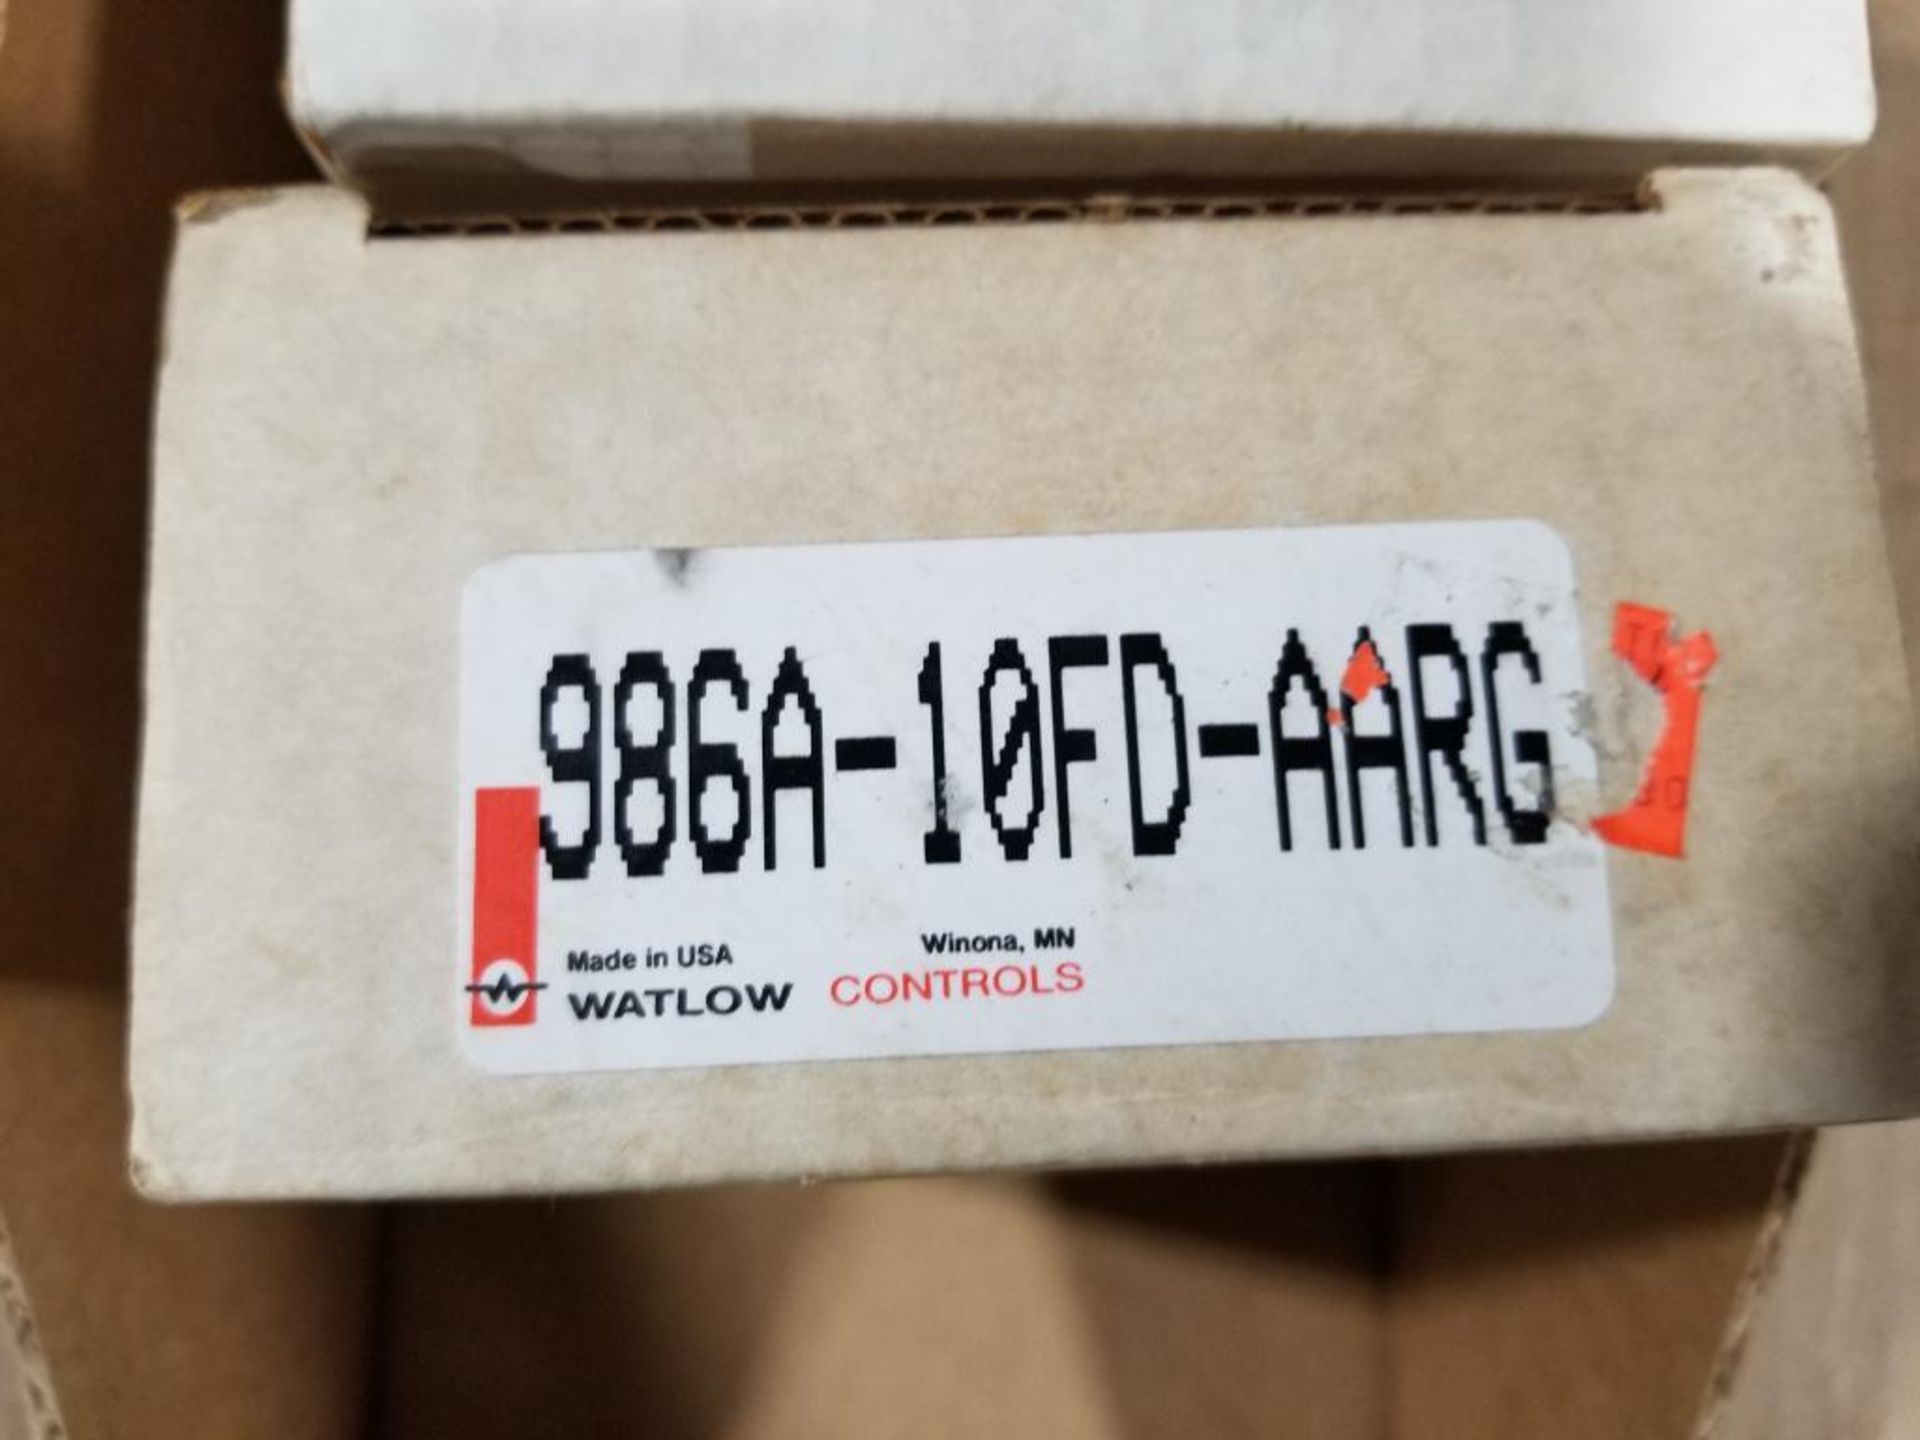 Qty 3 - Watlow controls. Part number 986A-10FD-AARG. - Image 2 of 5